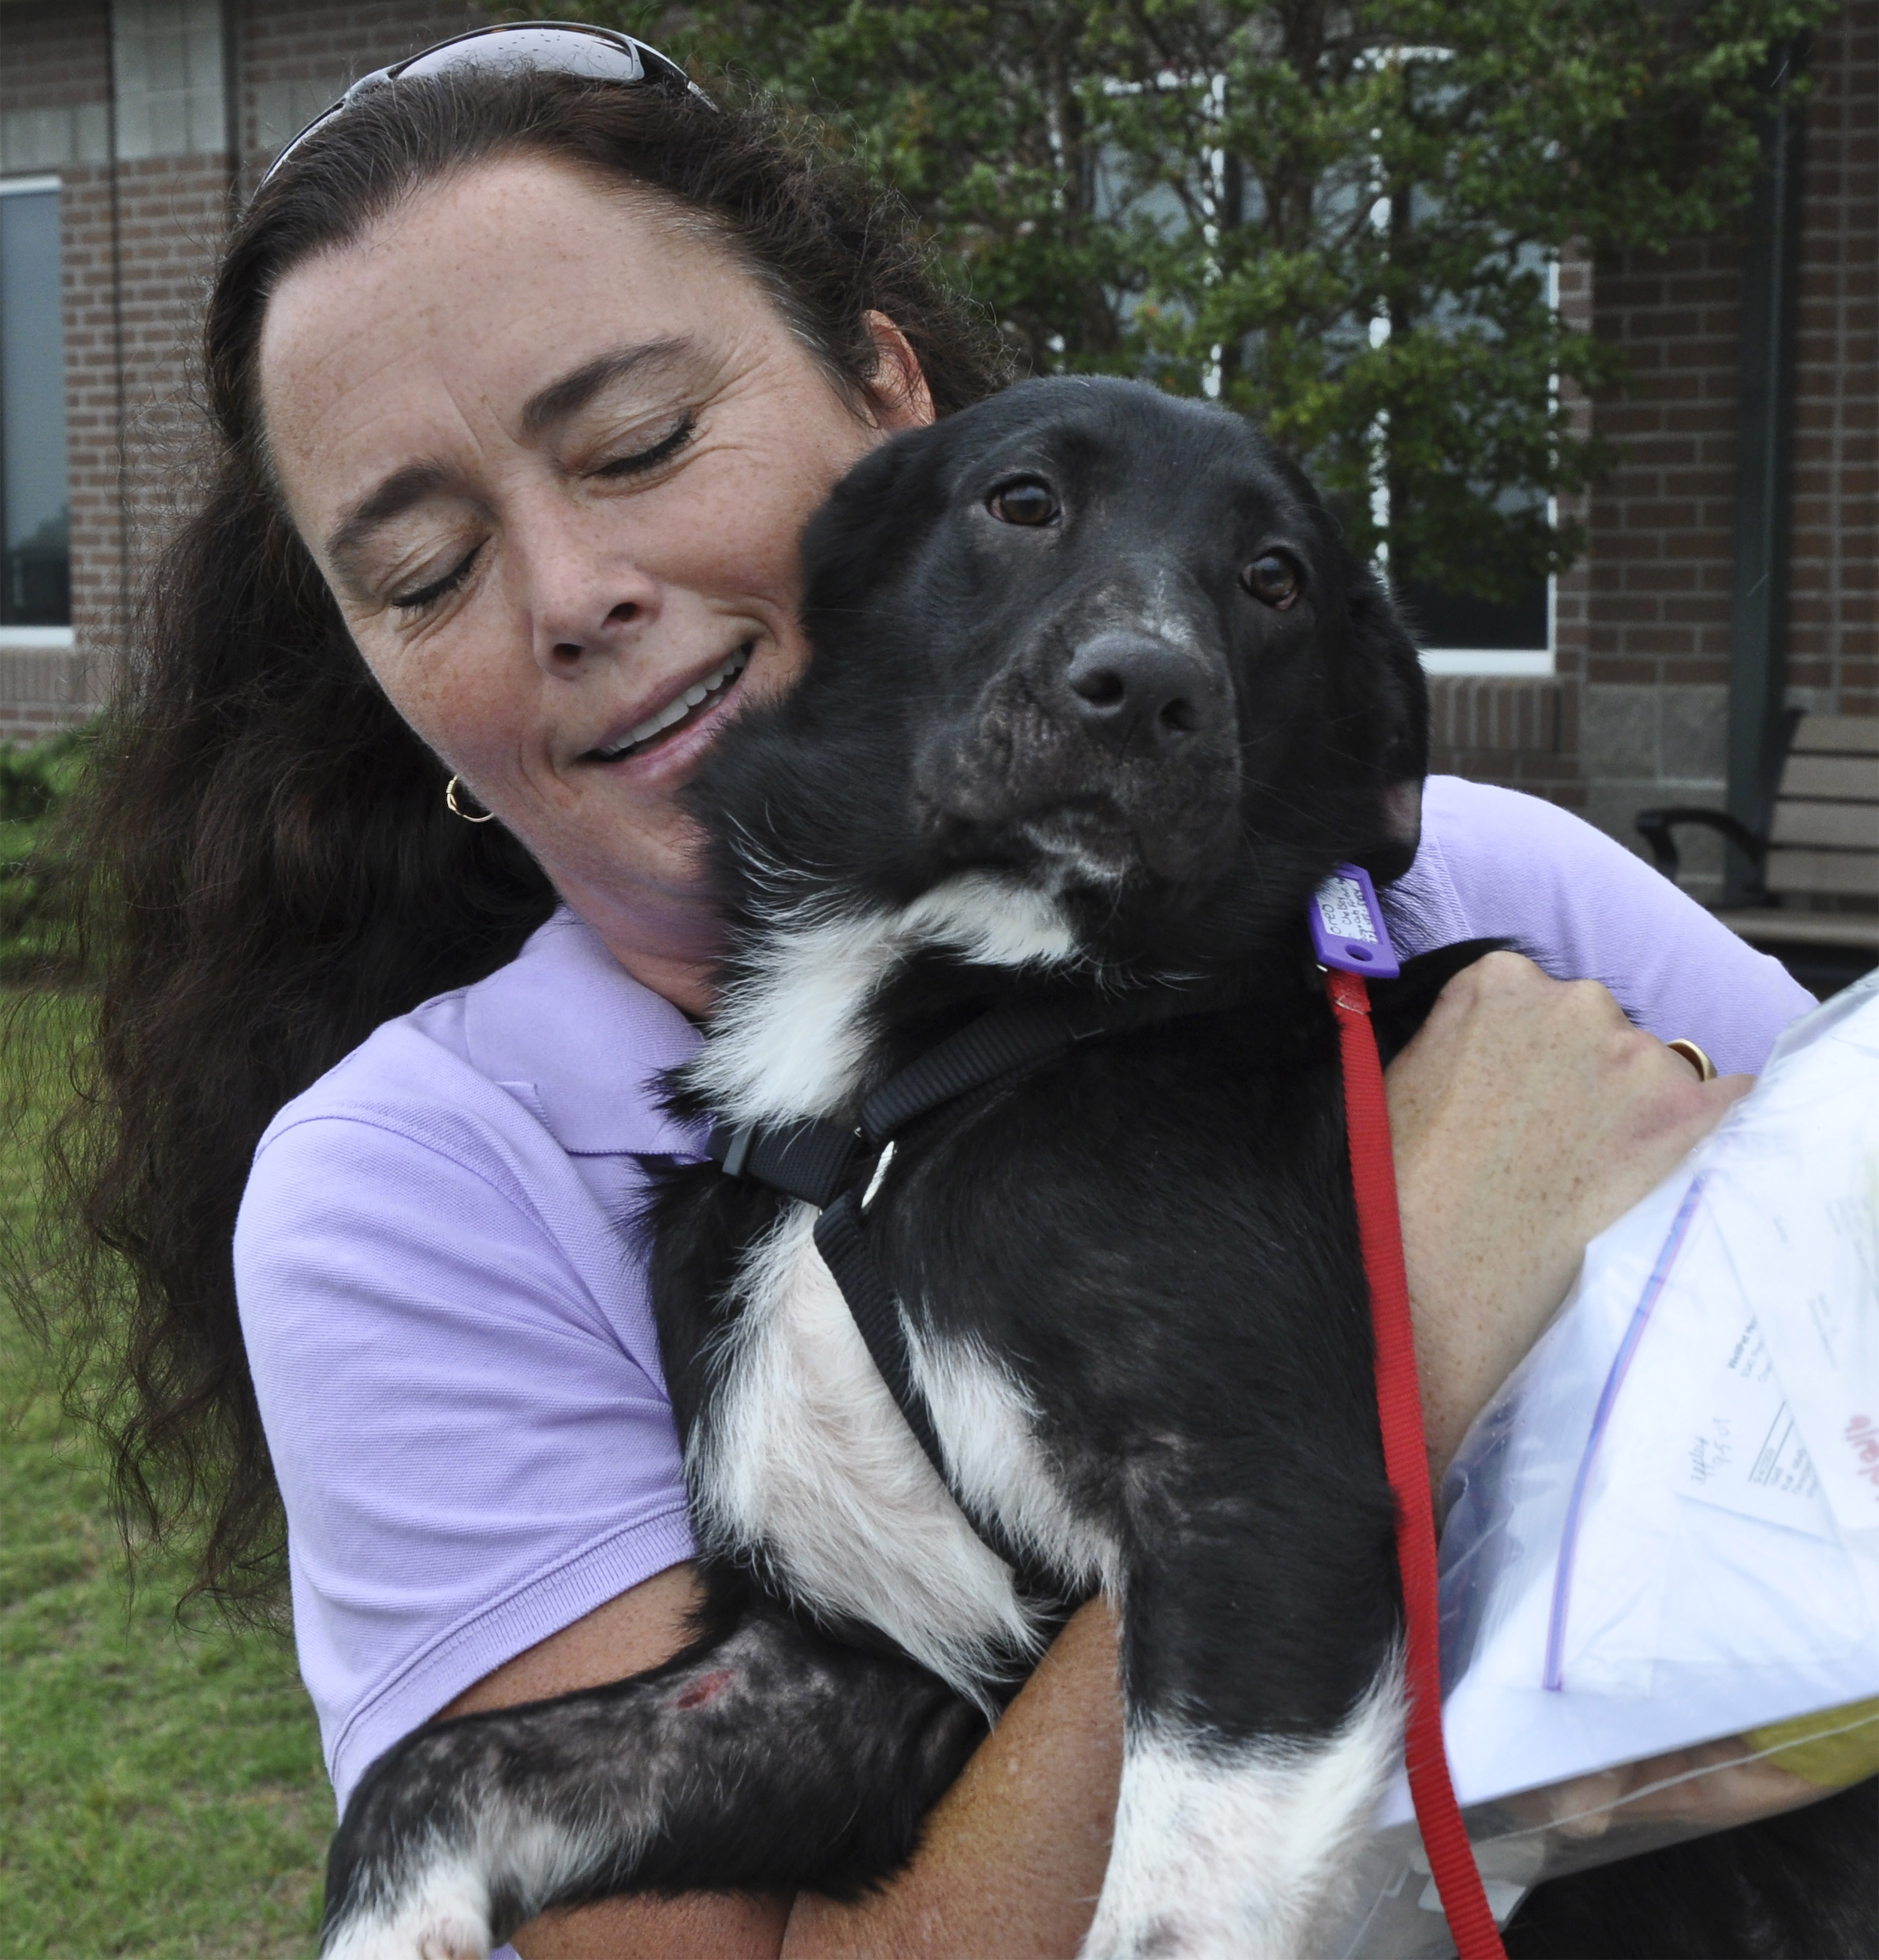 Oreo, a six-month-old female border collie, gets a last hug from her foster human Sabrina Sweeney-Garcia, who rescued Oreo from a north Georgia facility before the animal was to be put to sleep. Pilots N Paws is a volunteer organization that matches pilots and their aircraft with animals in need of new homes. Photo by David Tulis.